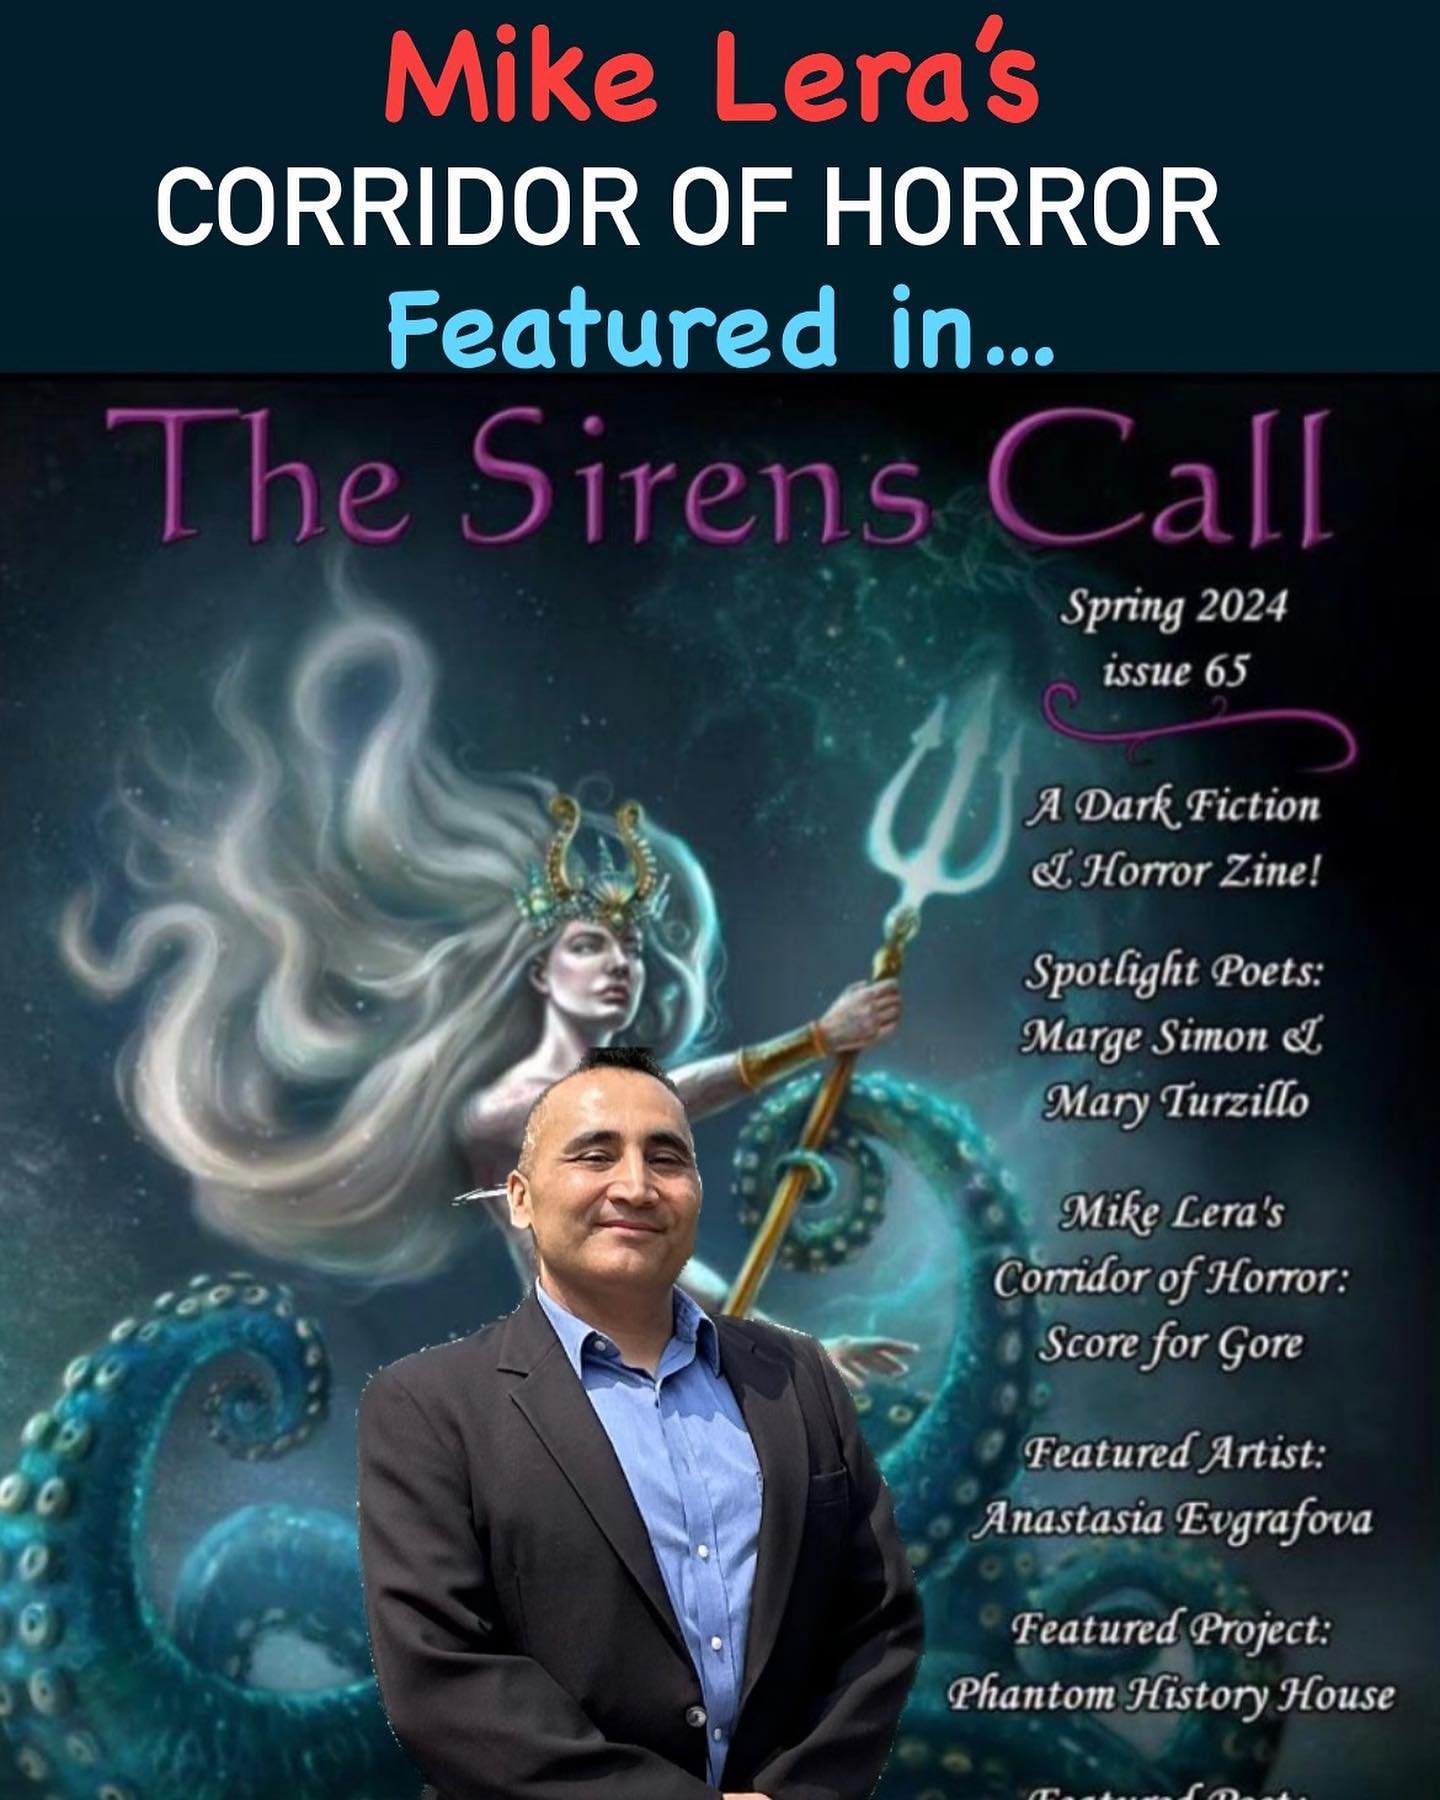 Hey everyone! My newest article for my column &ldquo;MIKE LERA&rsquo;S CORRIDOR OF HORROR&rdquo; is now out in &ldquo;THE SIRENS CALL SPRING ISSUE, spotlighting award-winning movie composer 🎼 EVERETT YOUNG. Read article RIGHT HERE - scroll left 👈
O